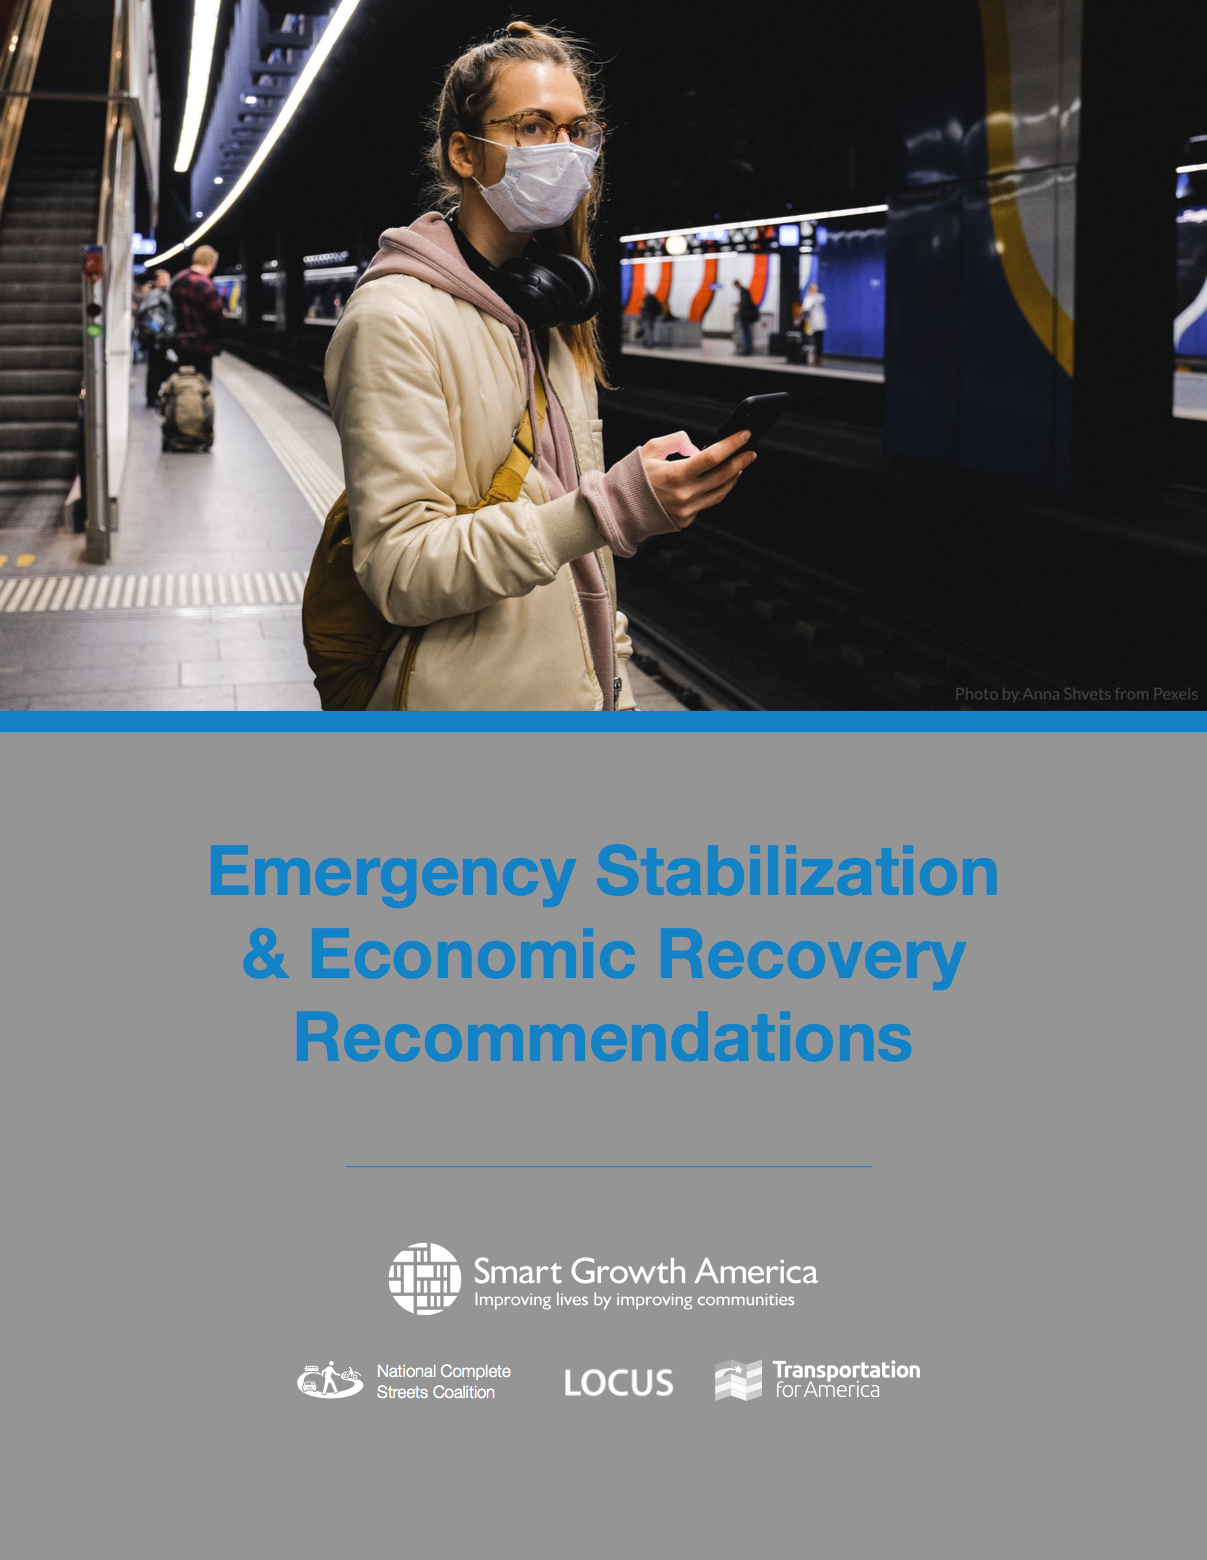 Emergency Stabilization & Economic Recovery Recommendations